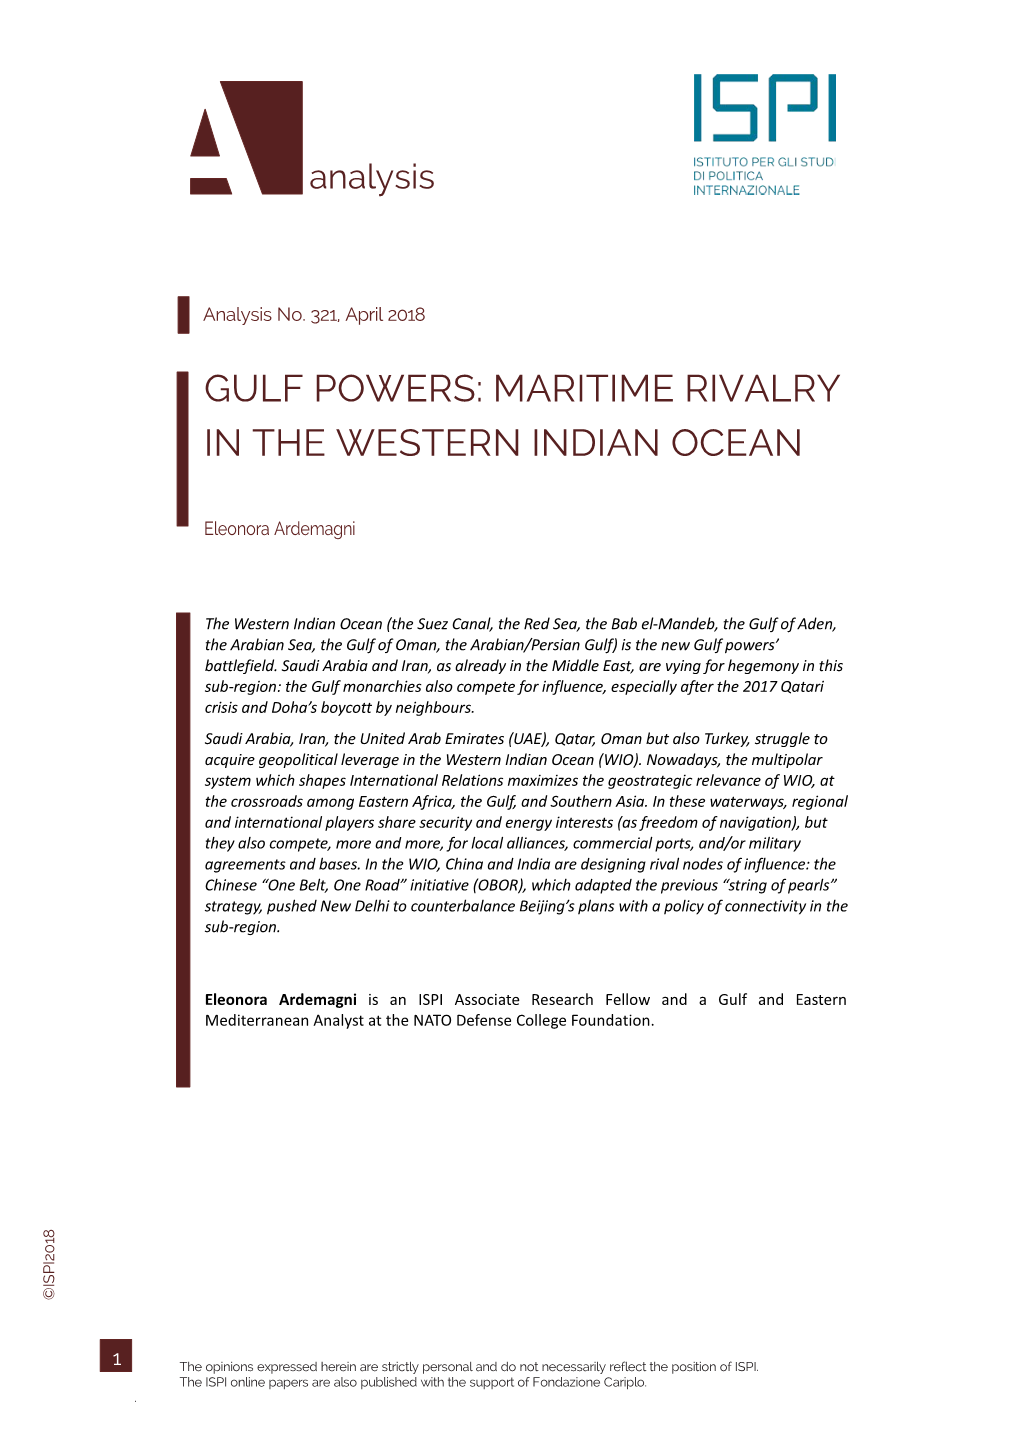 Gulf Powers: Maritime Rivalry in the Western Indian Ocean